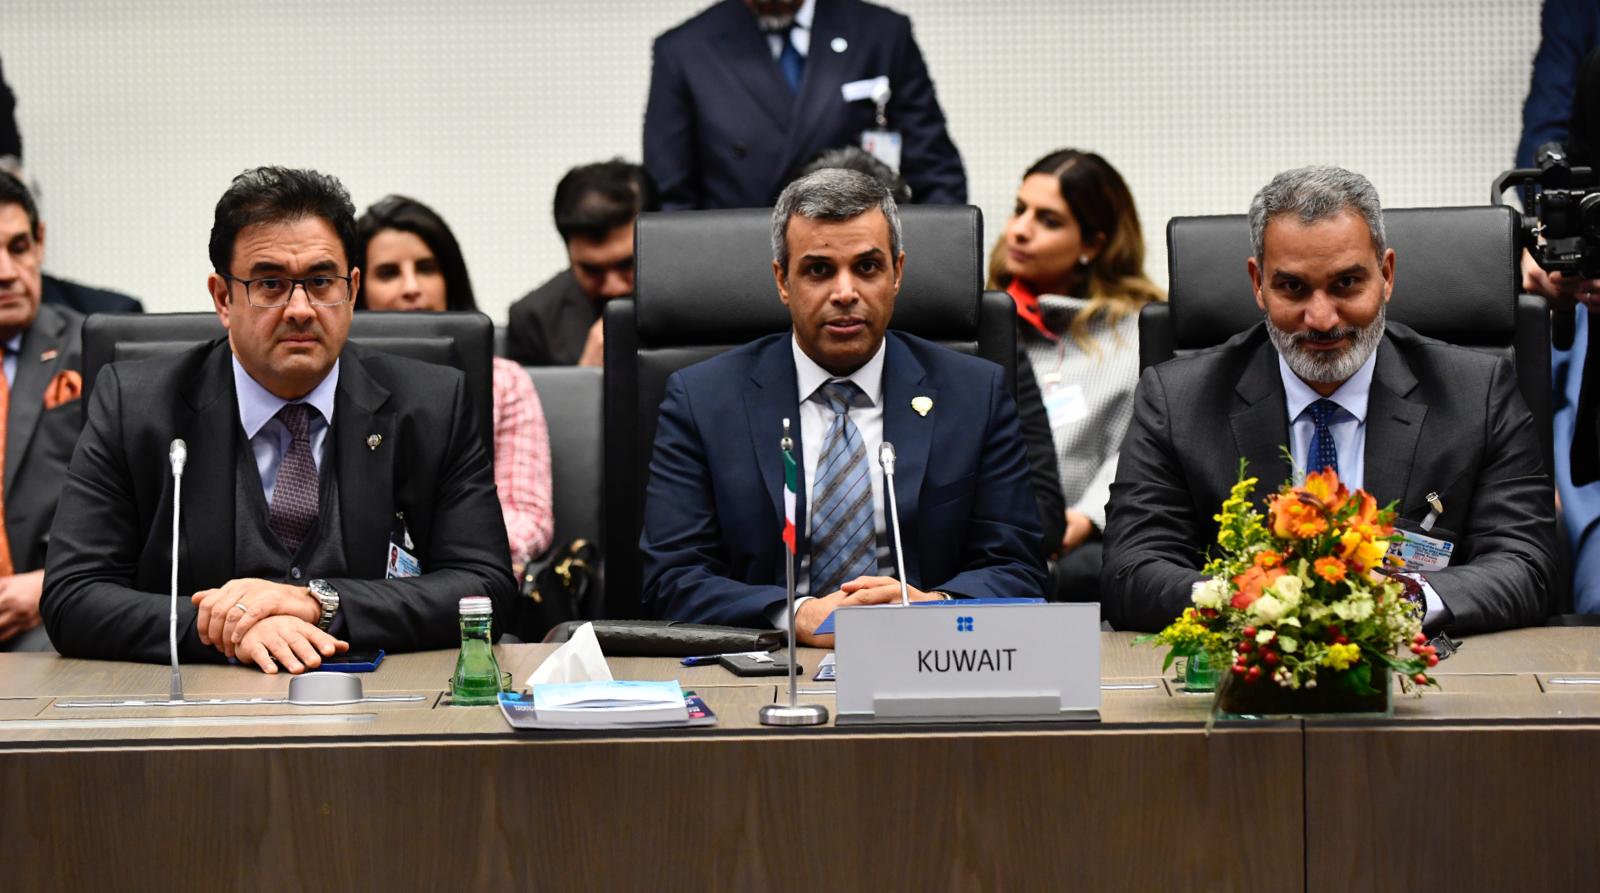 Kuwaiti Oil Minister during the meeting